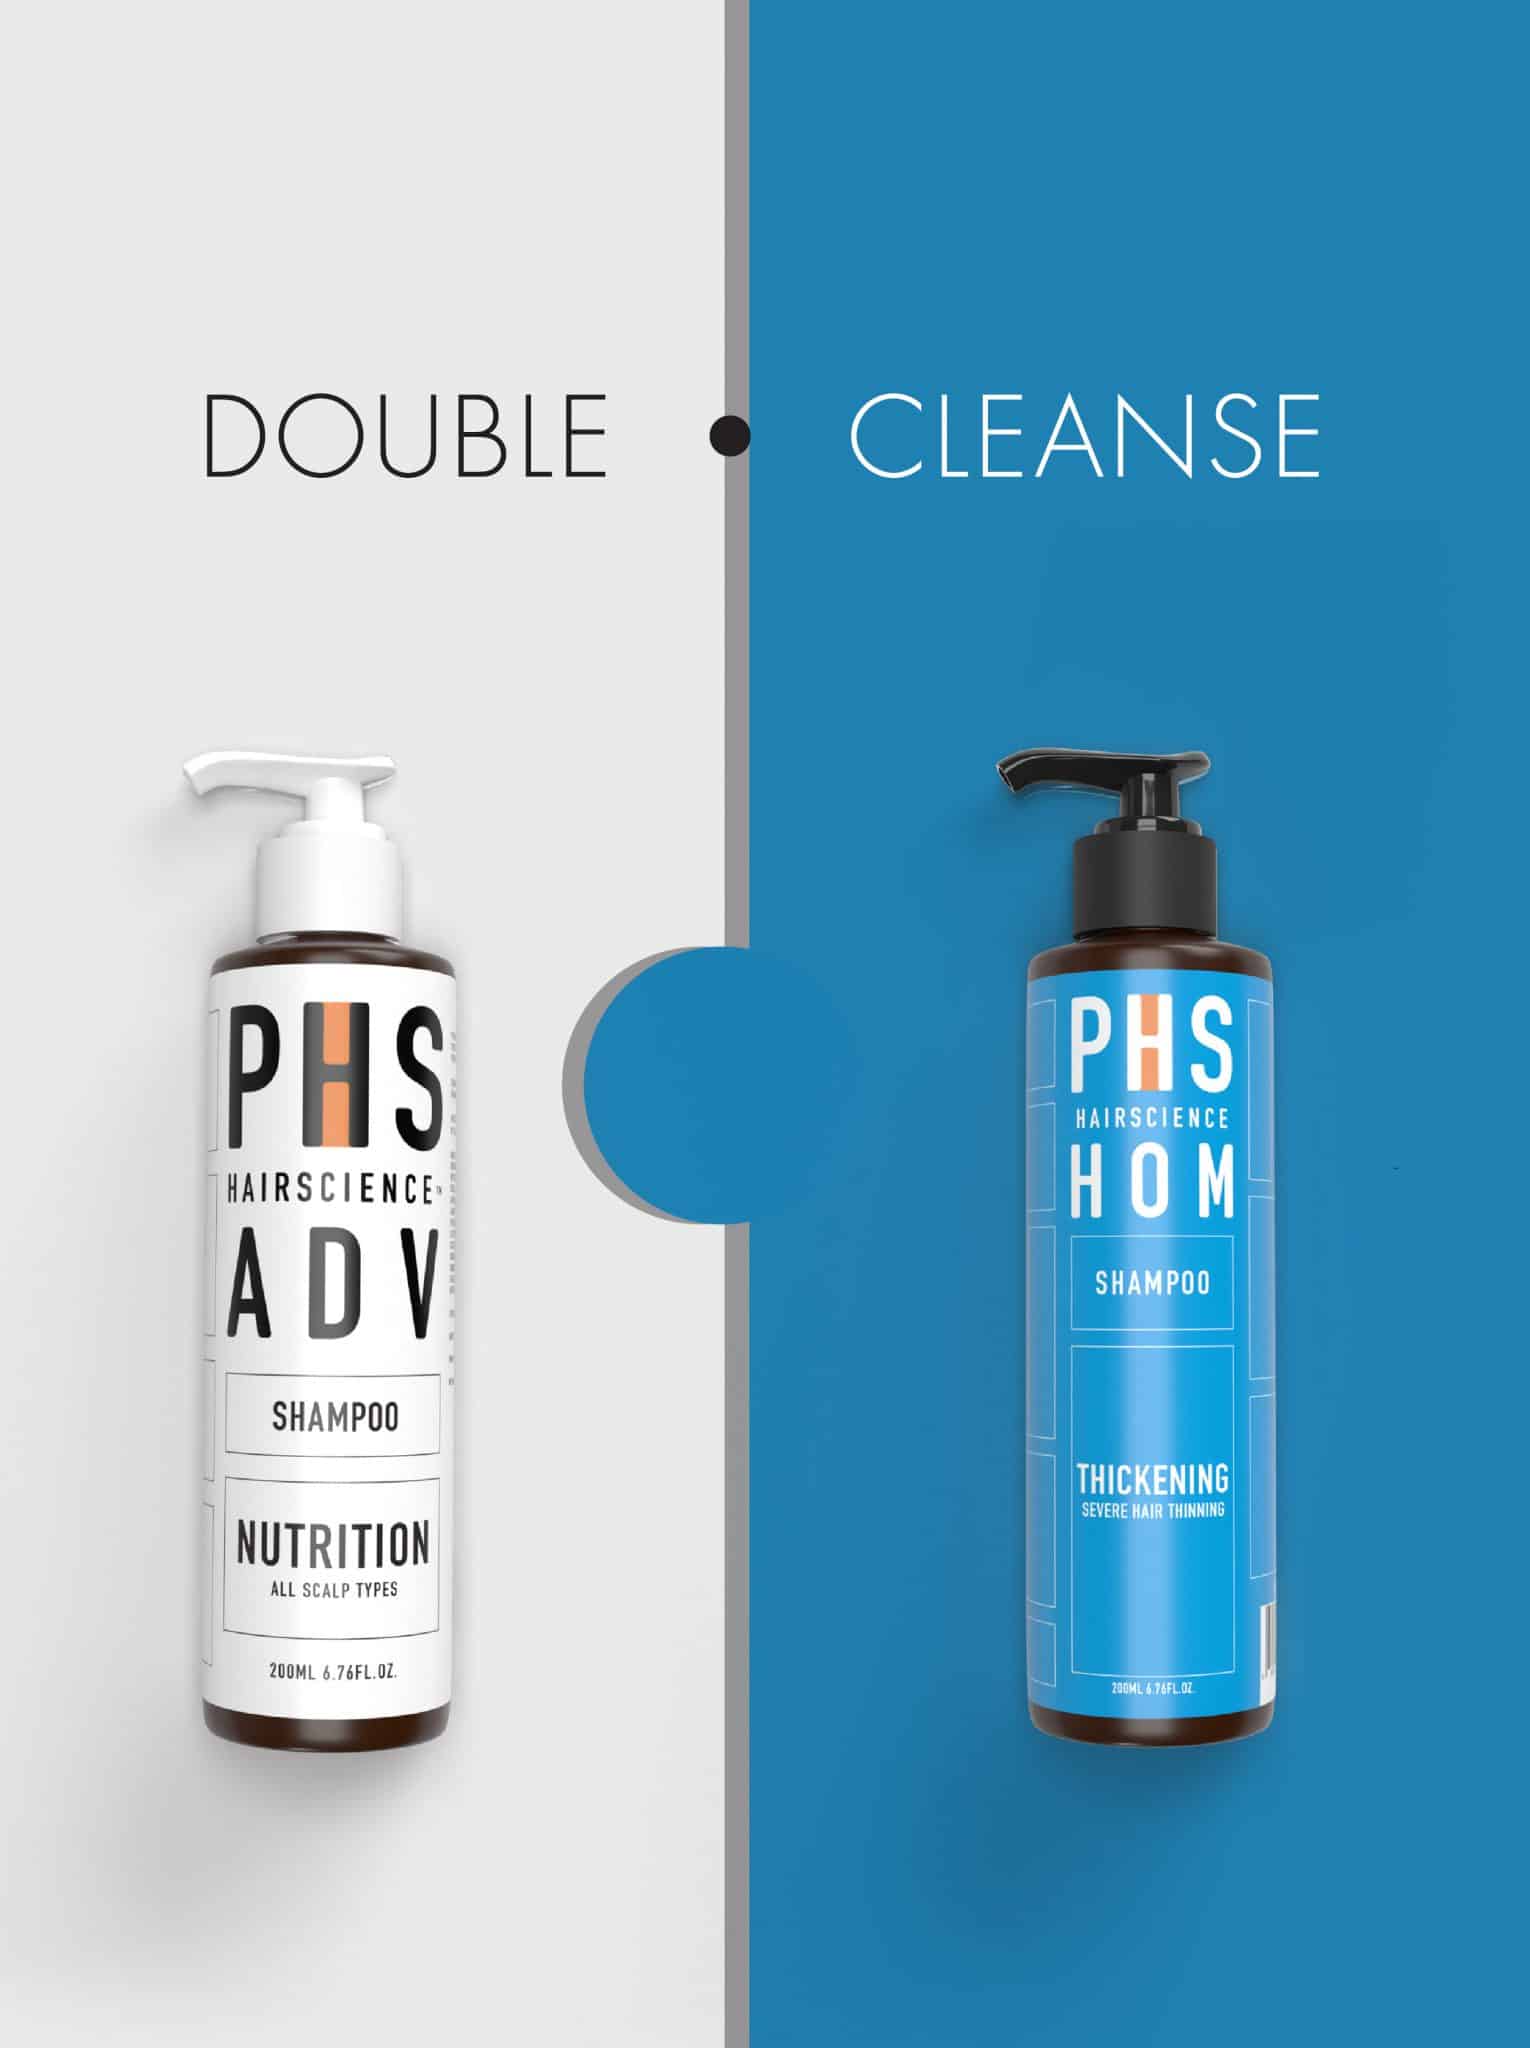 PHS HAIRSCIENCE®️ Signature Double Cleanse-Severe Male Hair Loss & Thinning